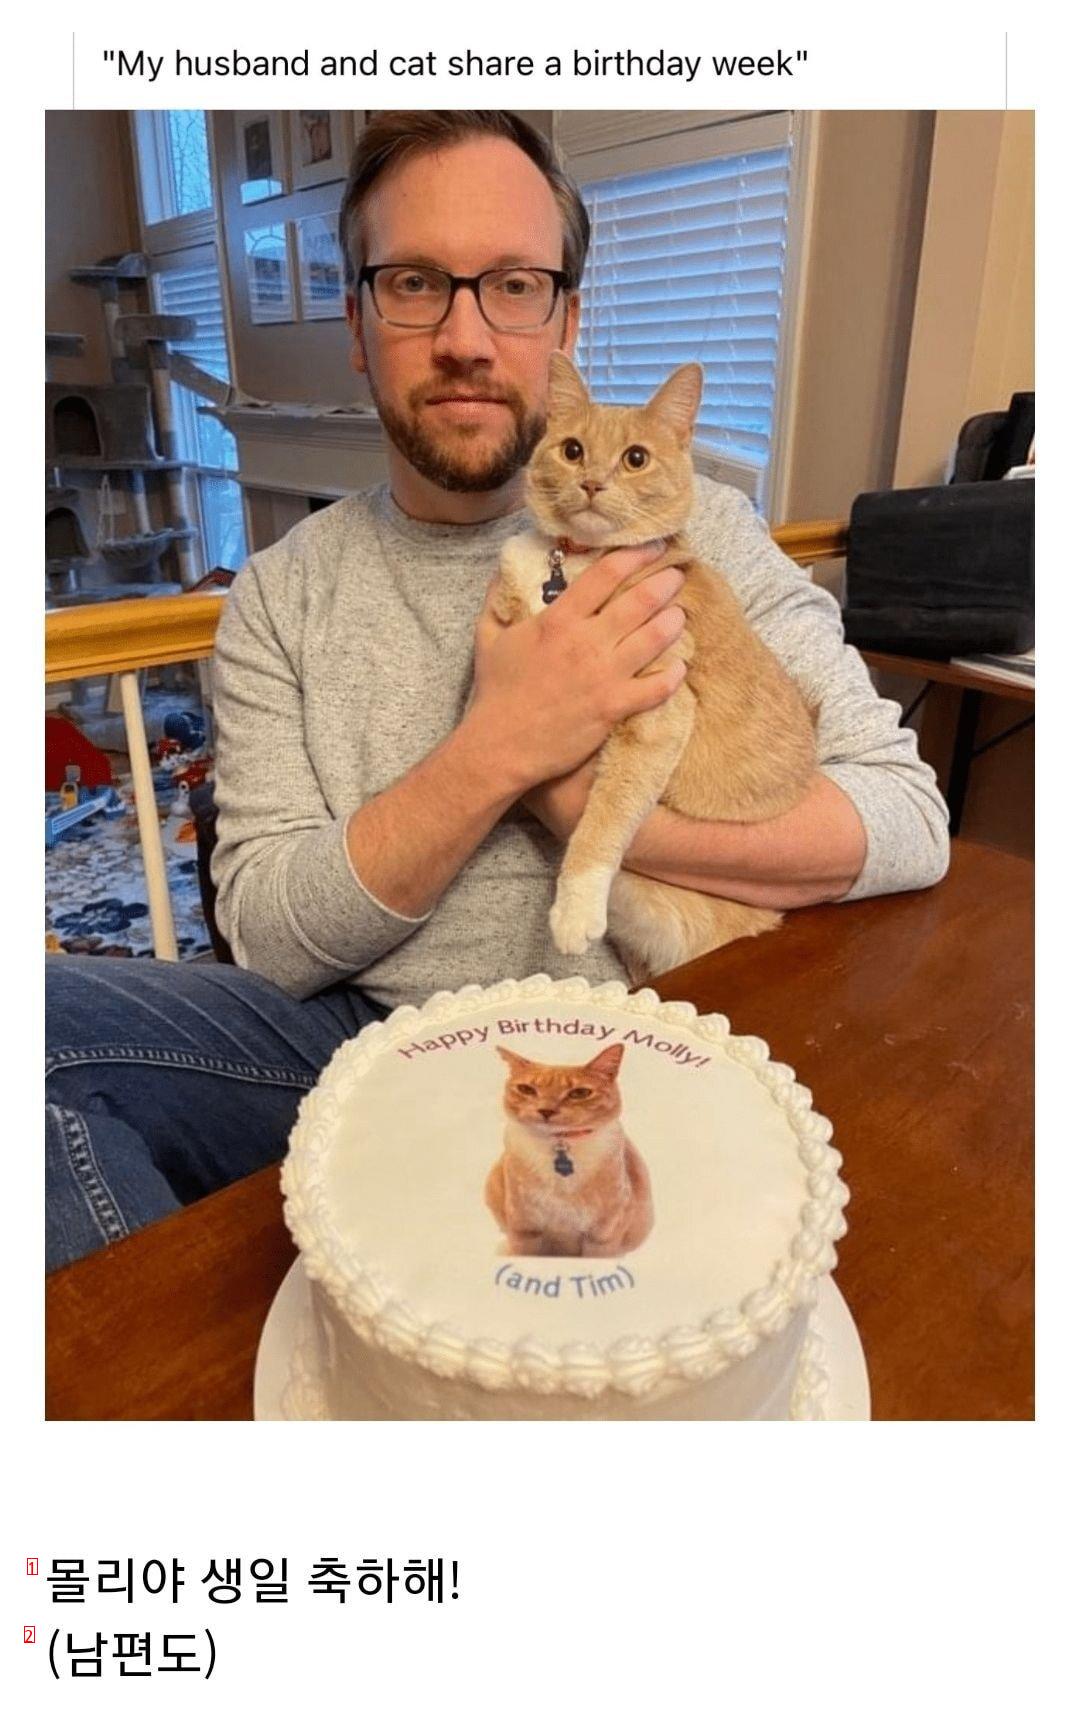 My husband and my cat's birthday is similar, so we decided to have a party together.